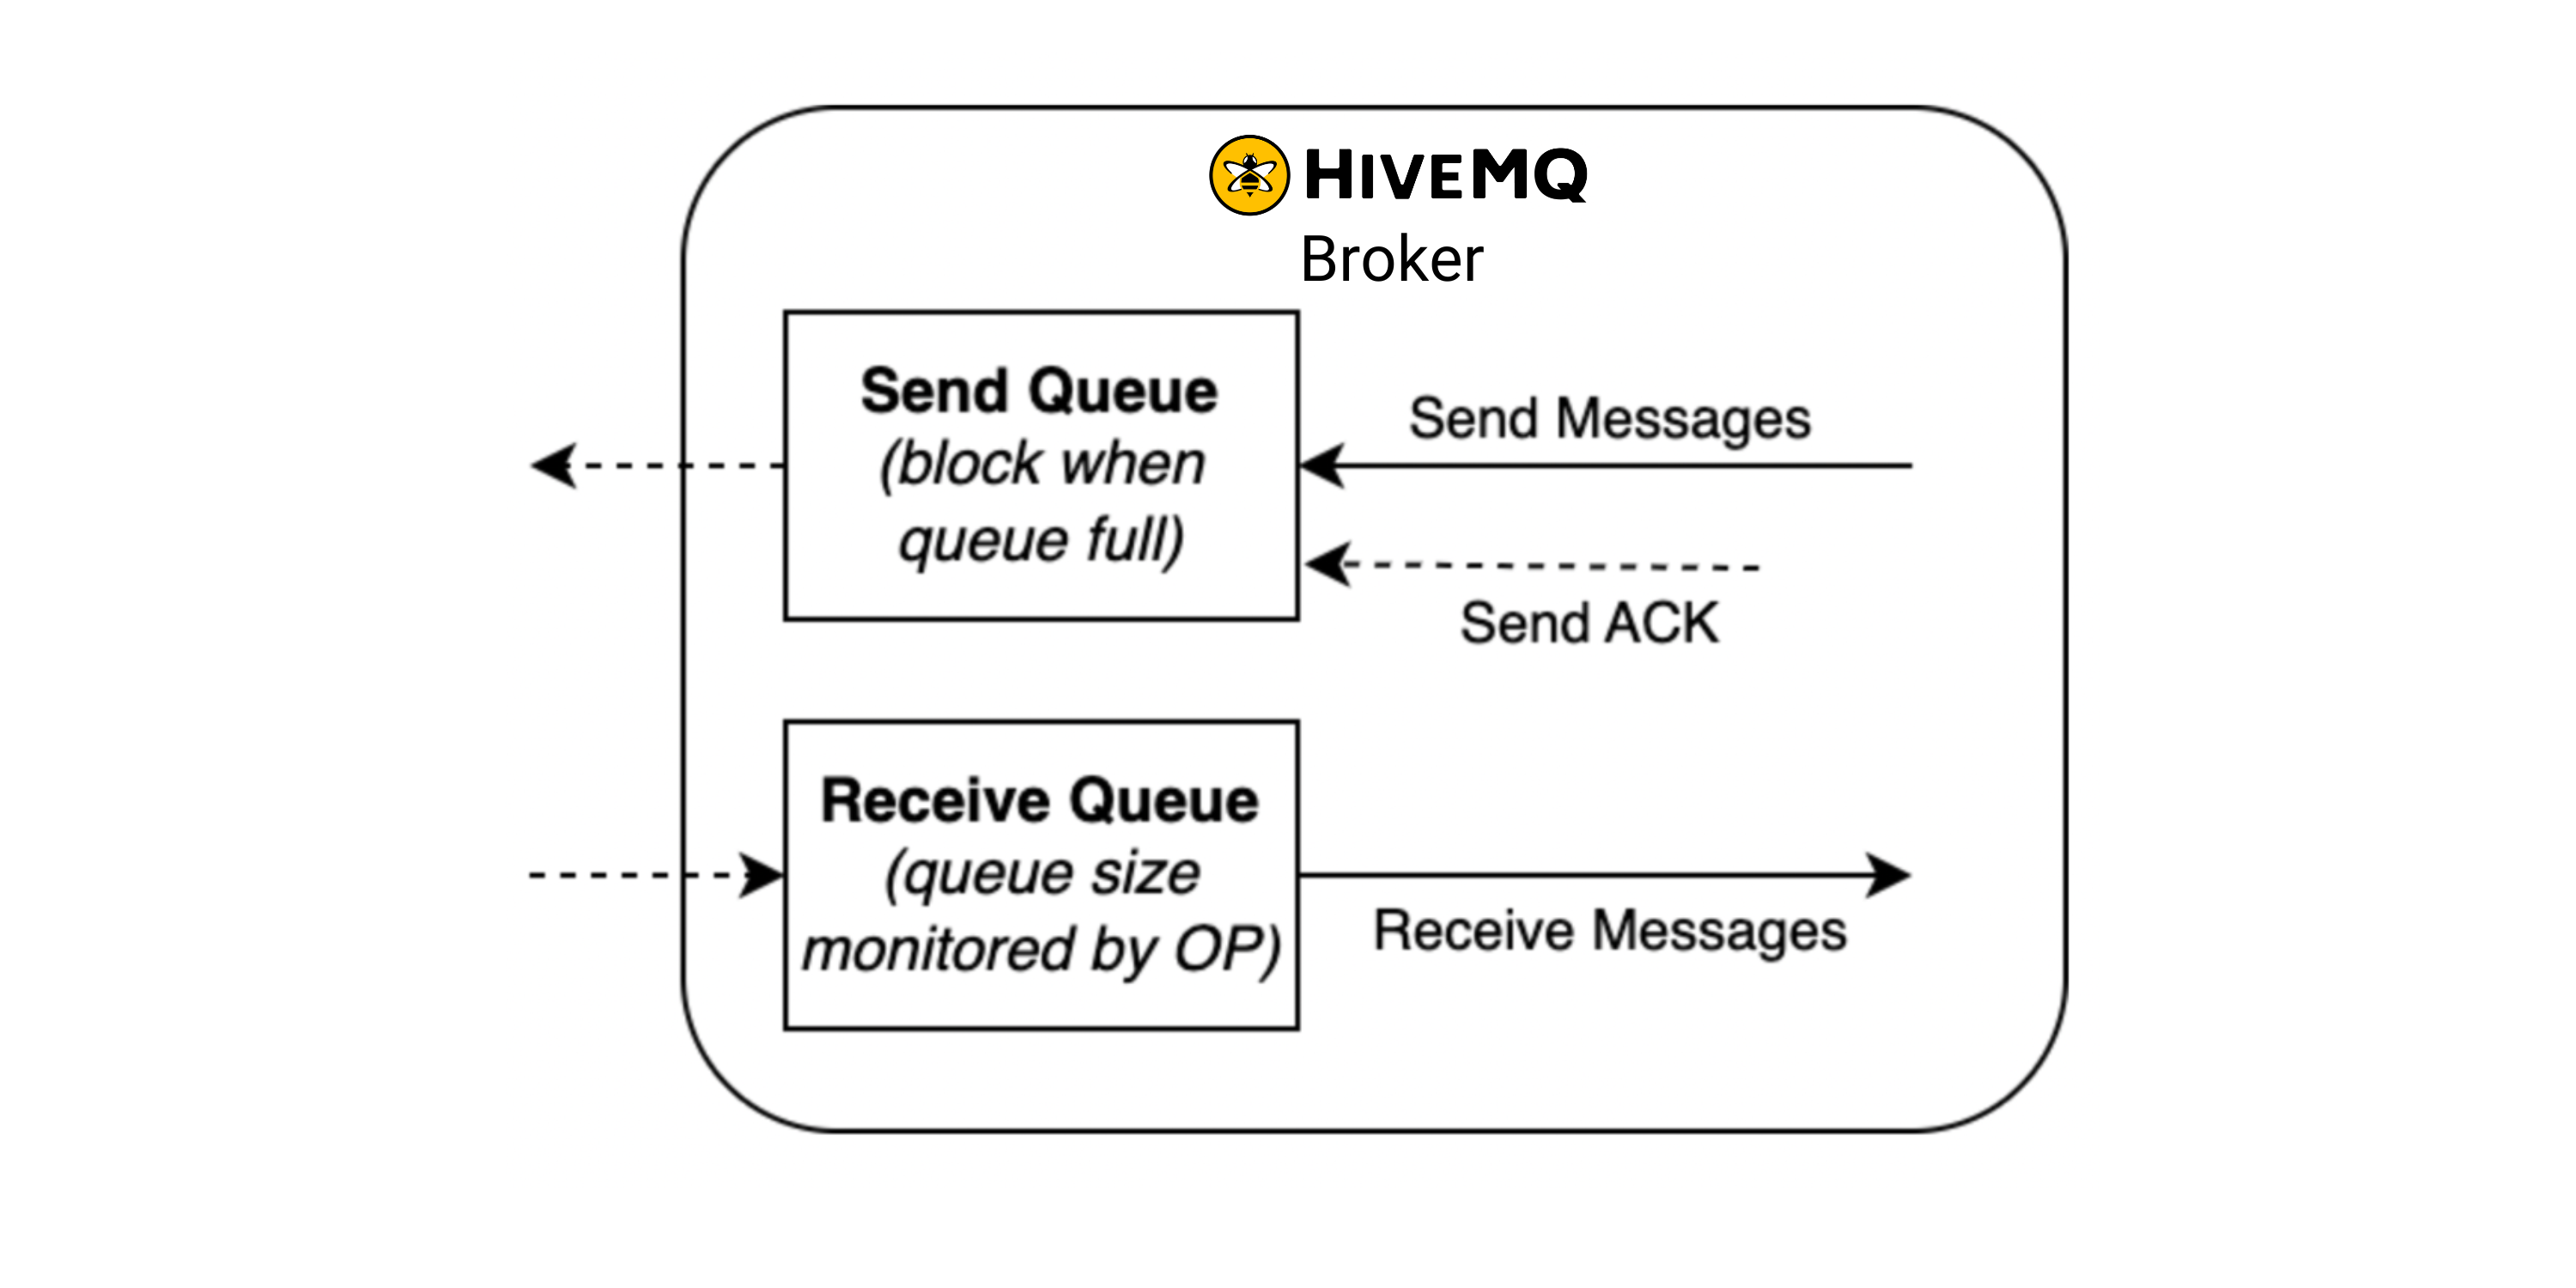 HiveMQ Broker Send and Receive Queue when queue size is monitored by OP